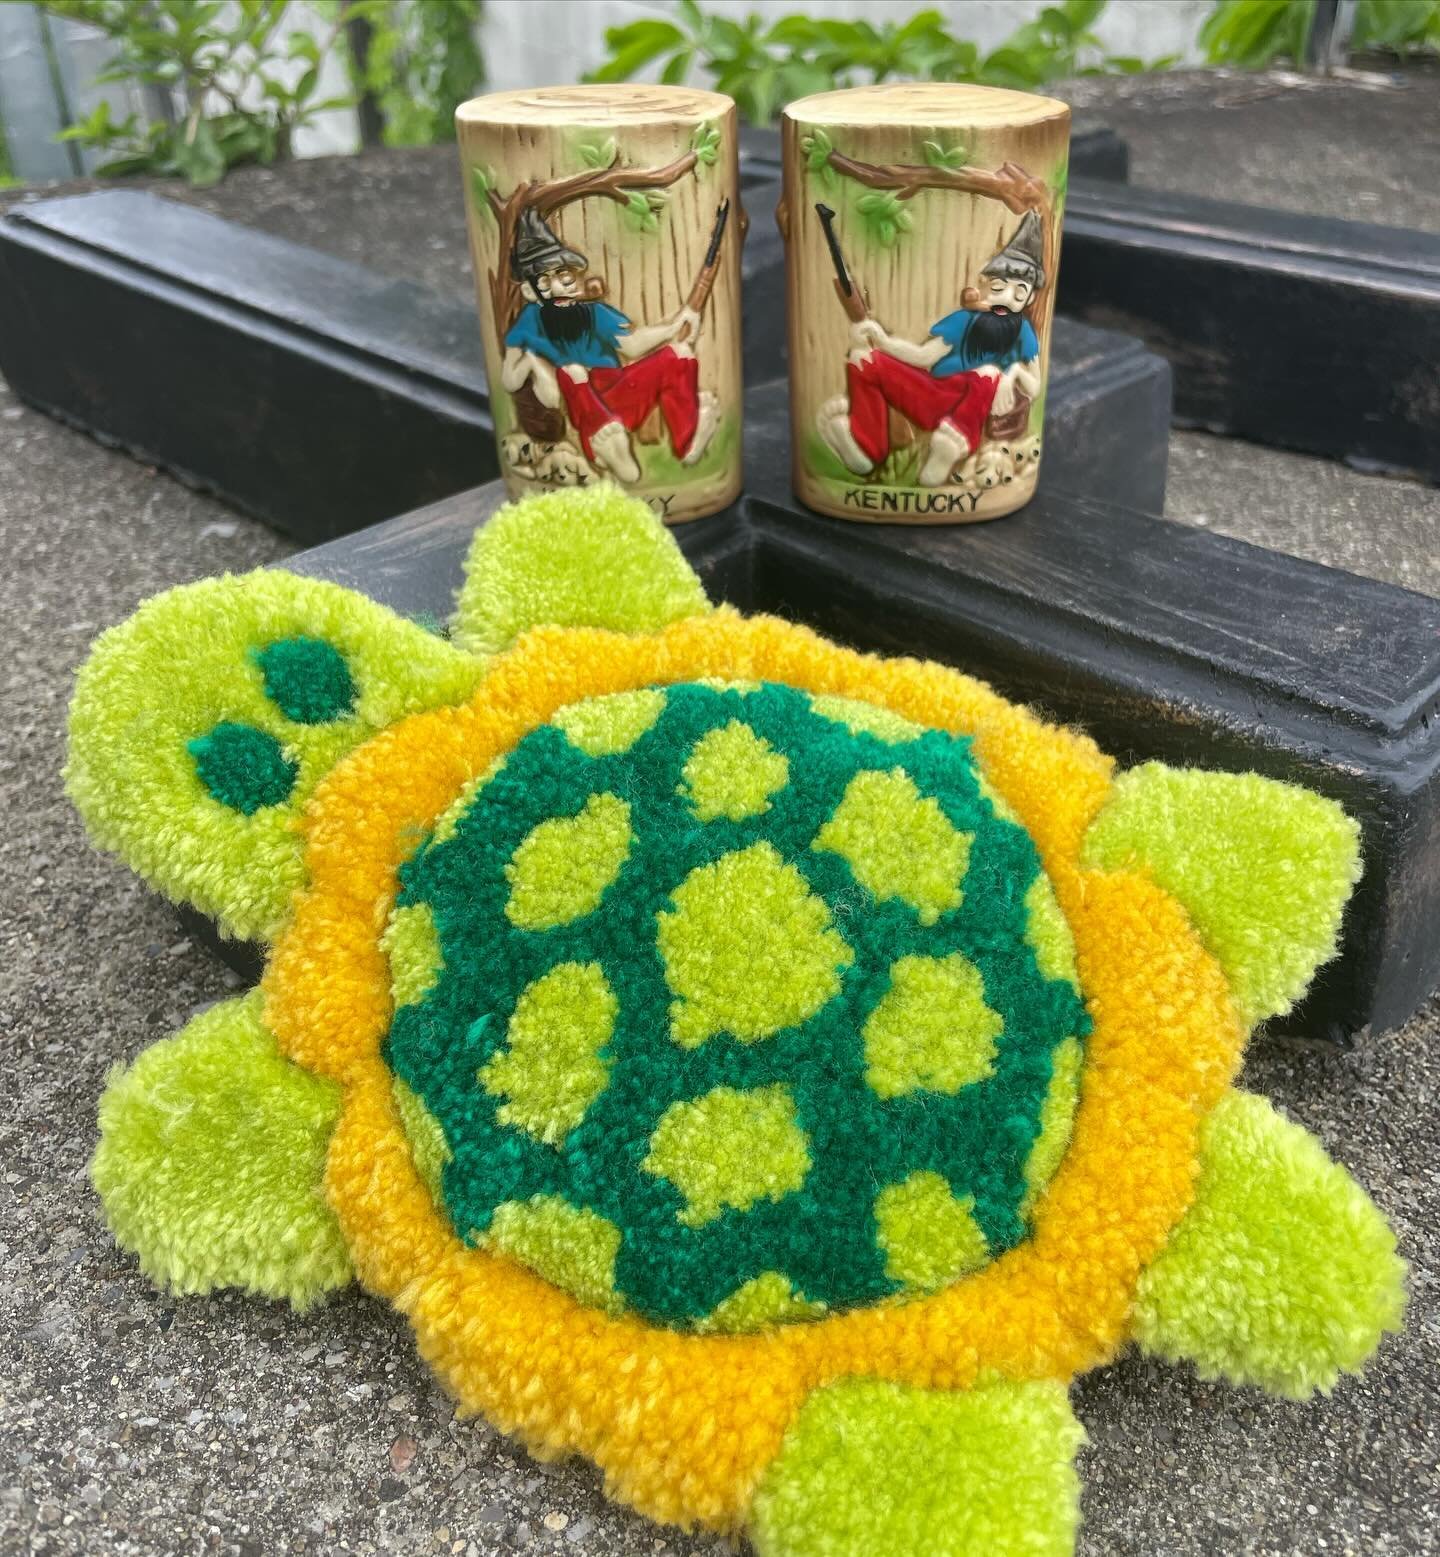 Kentucky and 🐢 go 🤚&amp; 🤚! Tufted turtle $30. 1970s Kentucky S&amp;P shakers $22.